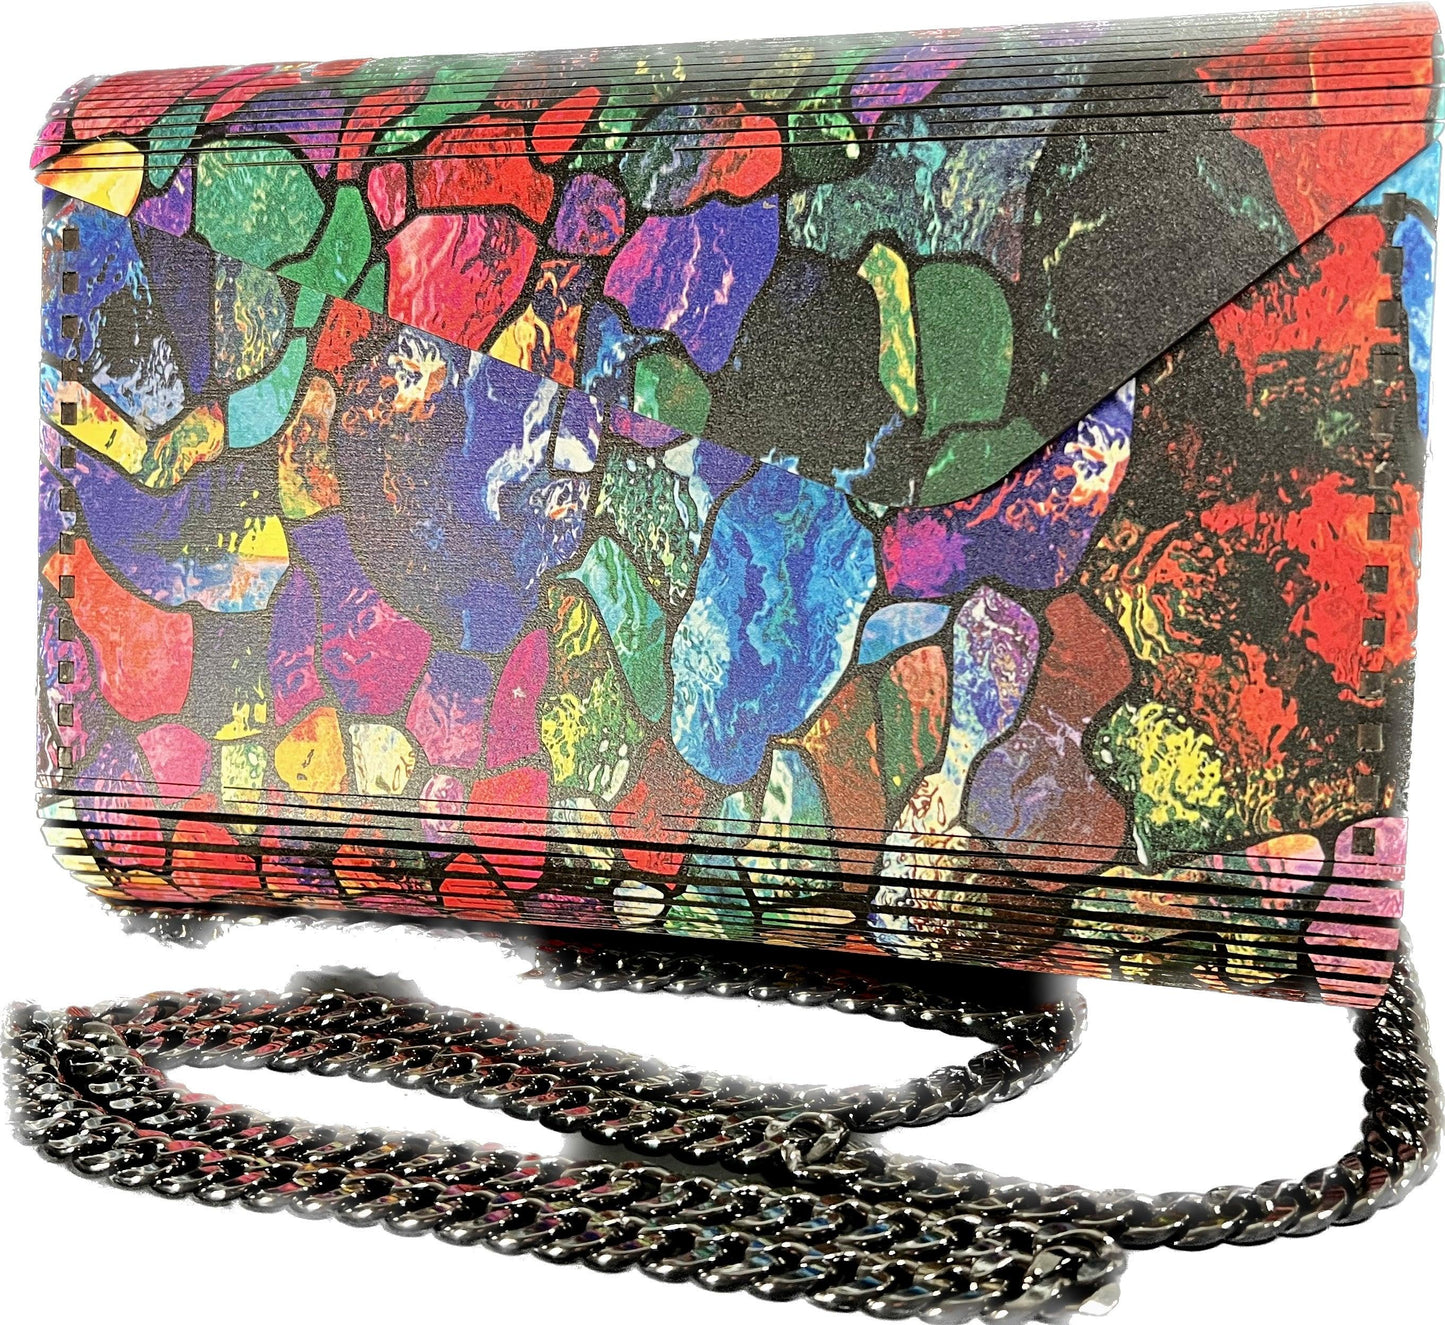 “Stained Glass” Wood Purse or Clutch